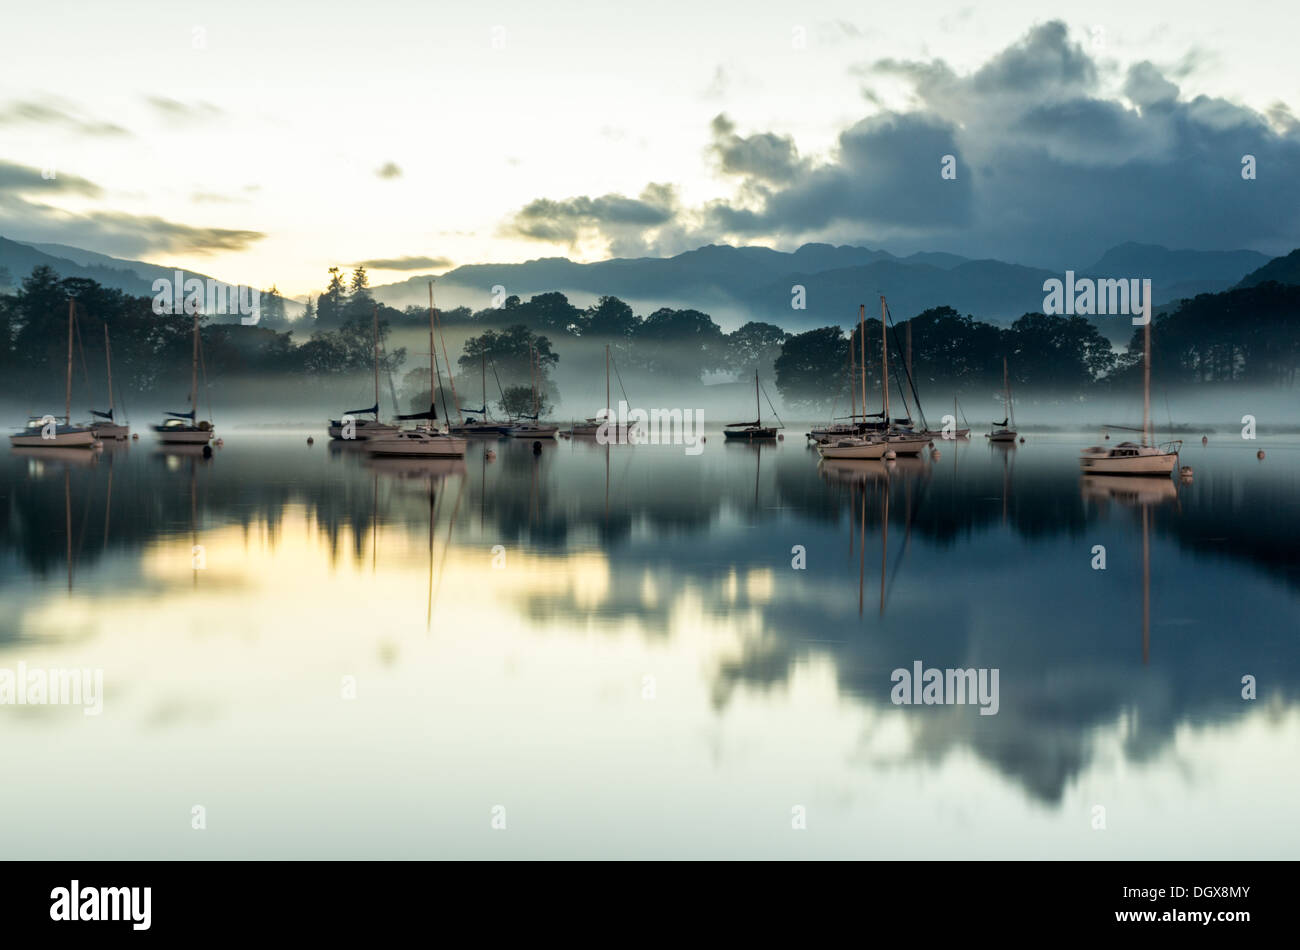 A late evening scene on Windermere lake with distant trees and yachts hidden in the mist and reflected in the water. Stock Photo